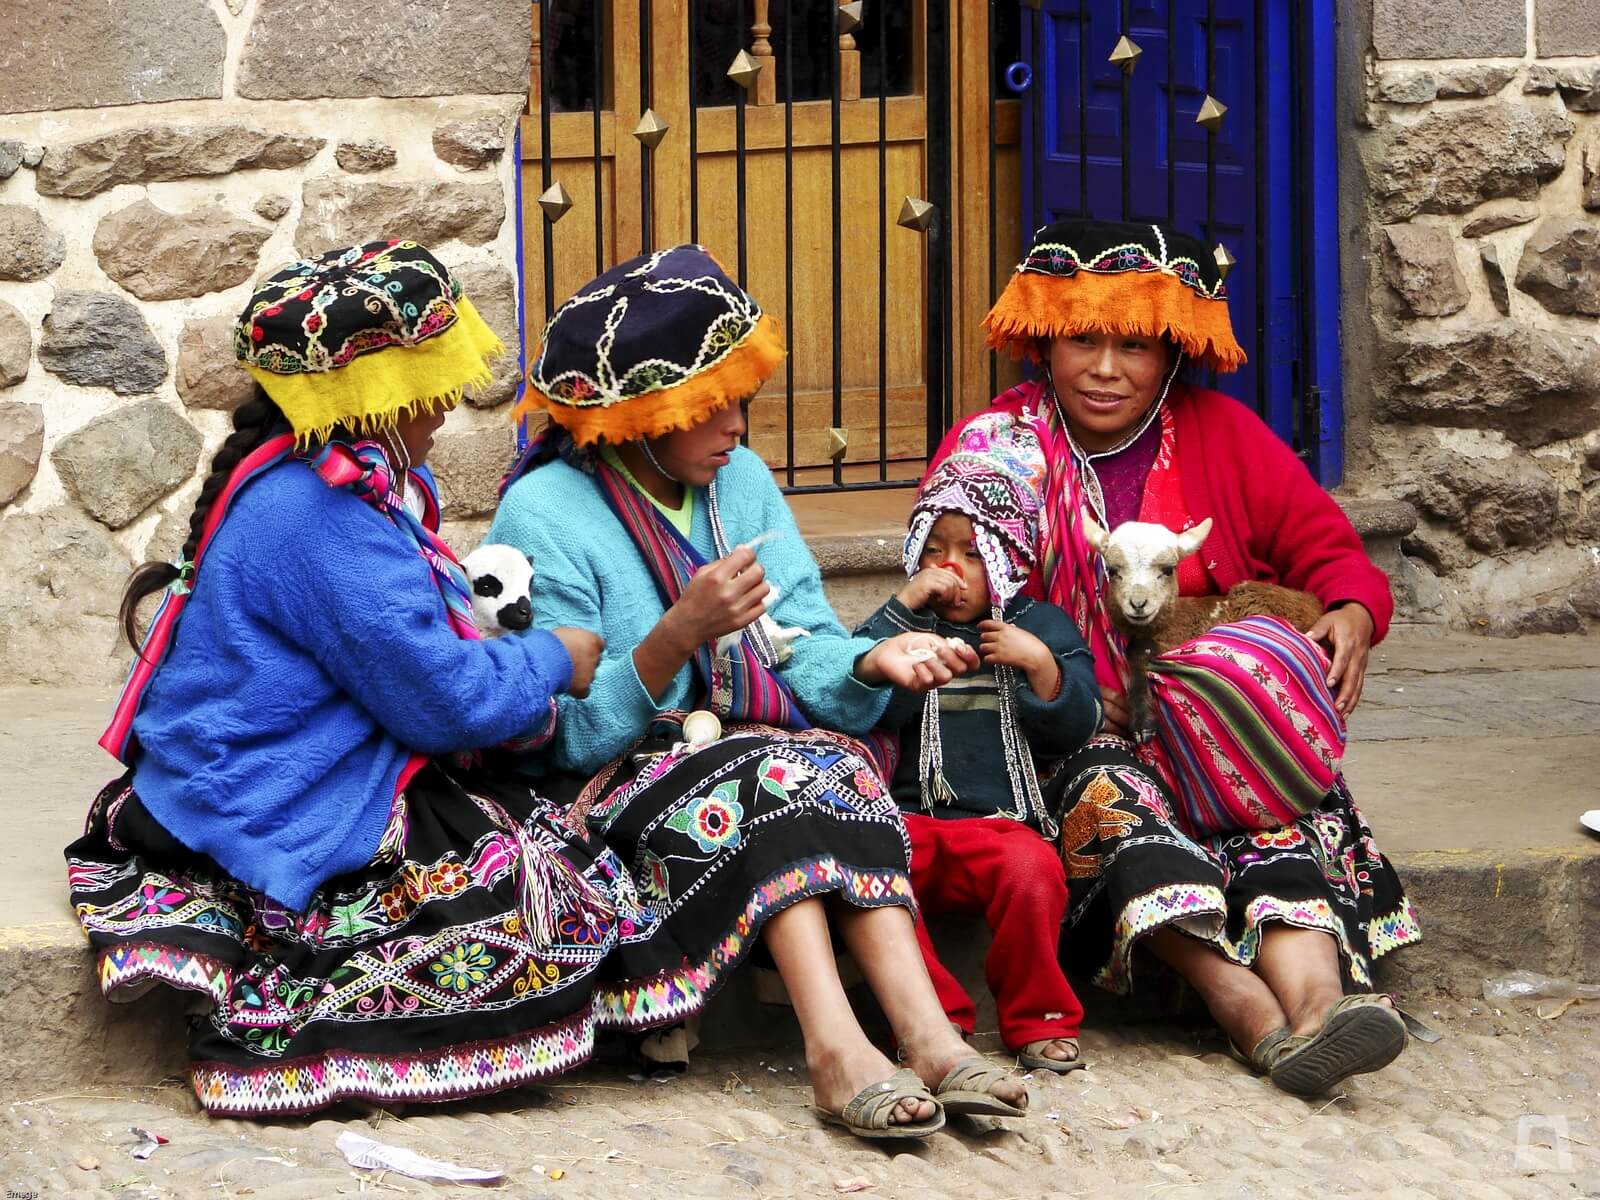 11Local ladies in traditional dresses on the streets of Cusco, Peru. | RESPONSible Travel Peru